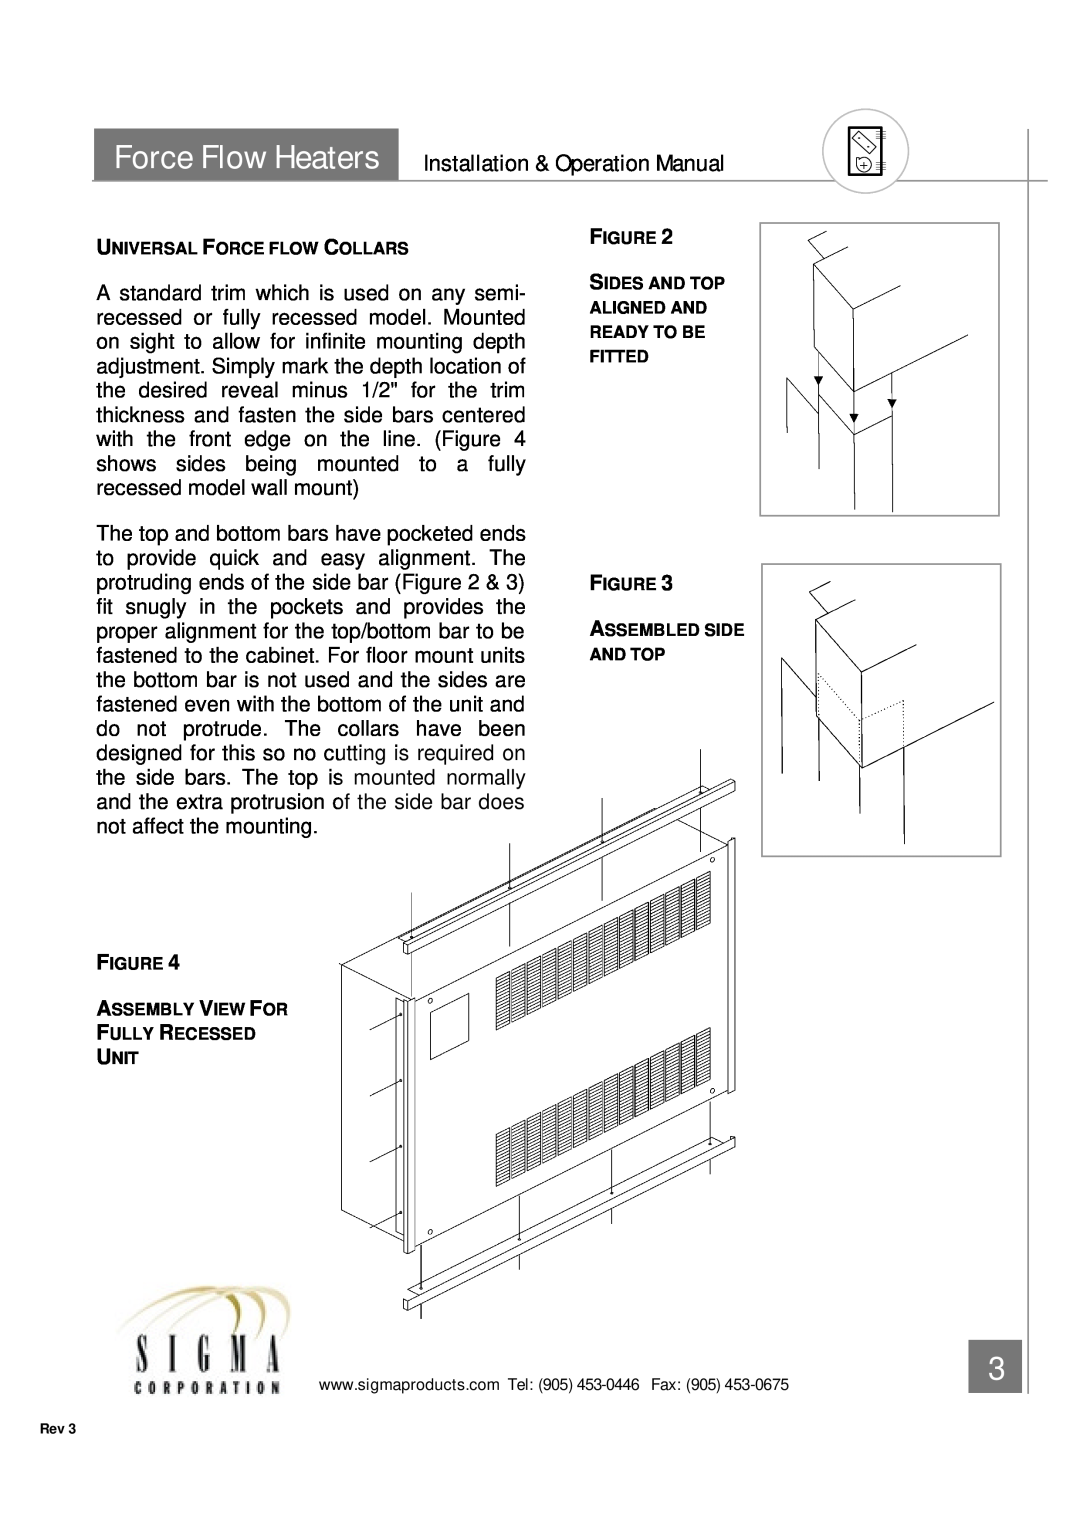 Sigma Force Flow Heaters operation manual Universal Force Flow Collars, Figure Assembly View For Fully Recessed Unit 